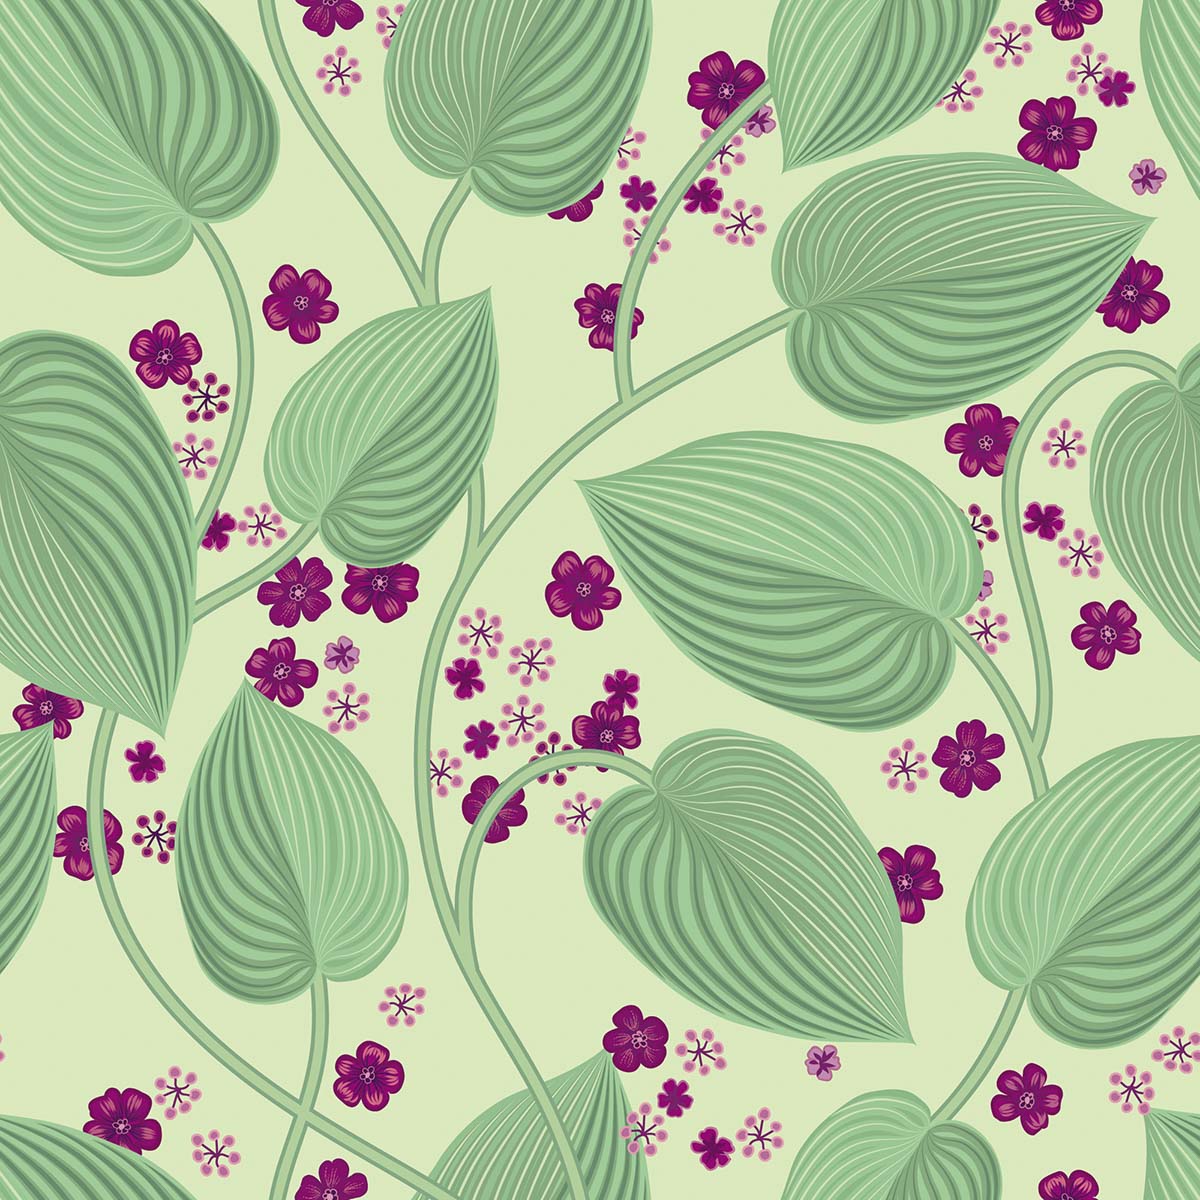 A green and pink floral pattern